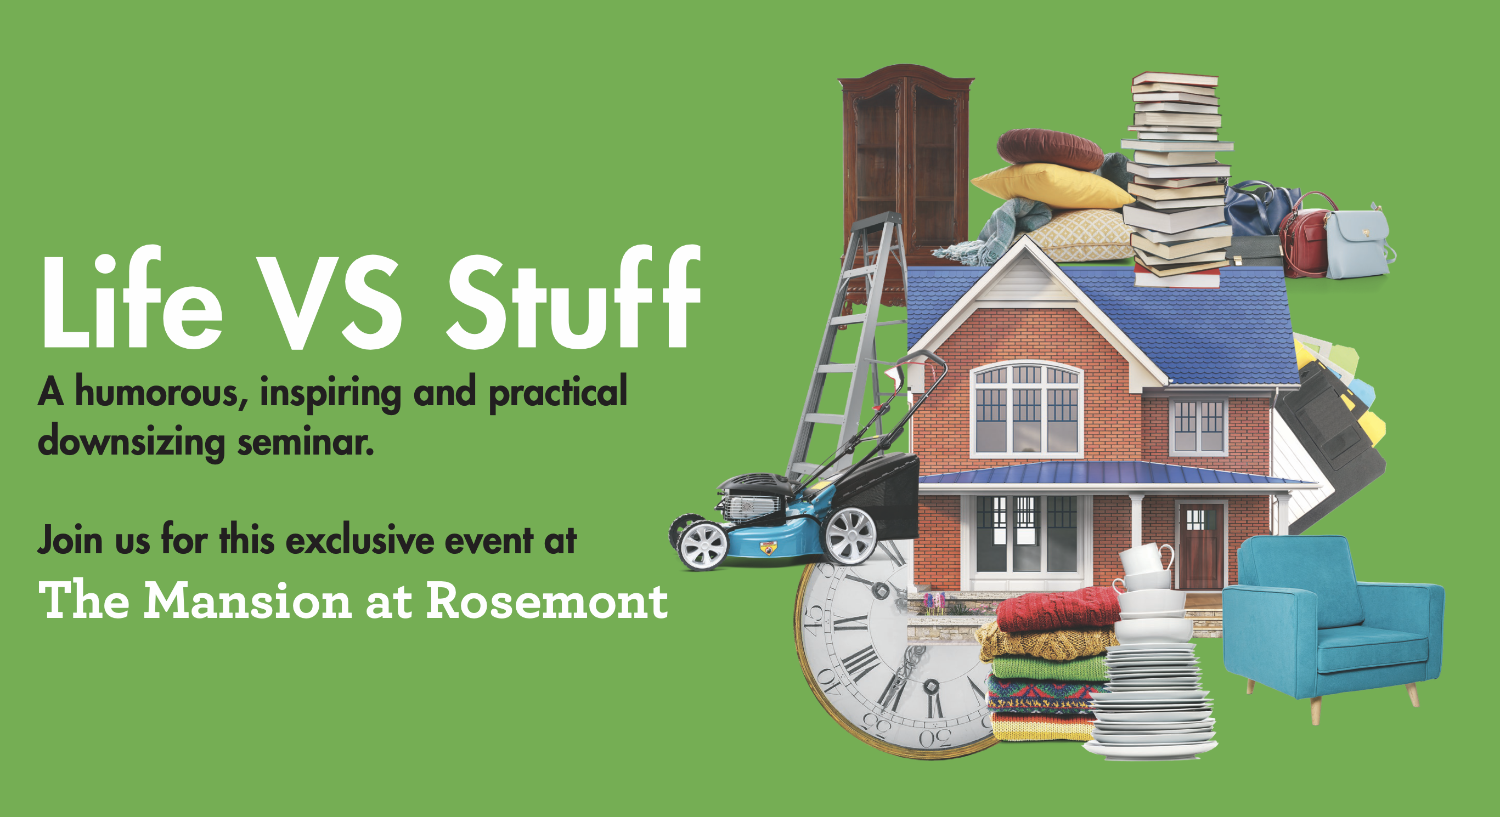 Life vs Stuff. A humorous
      
    
      
        inspiring and practical downsizing seminar. Join us for this exclusive event at The Mansion at Rosemont.